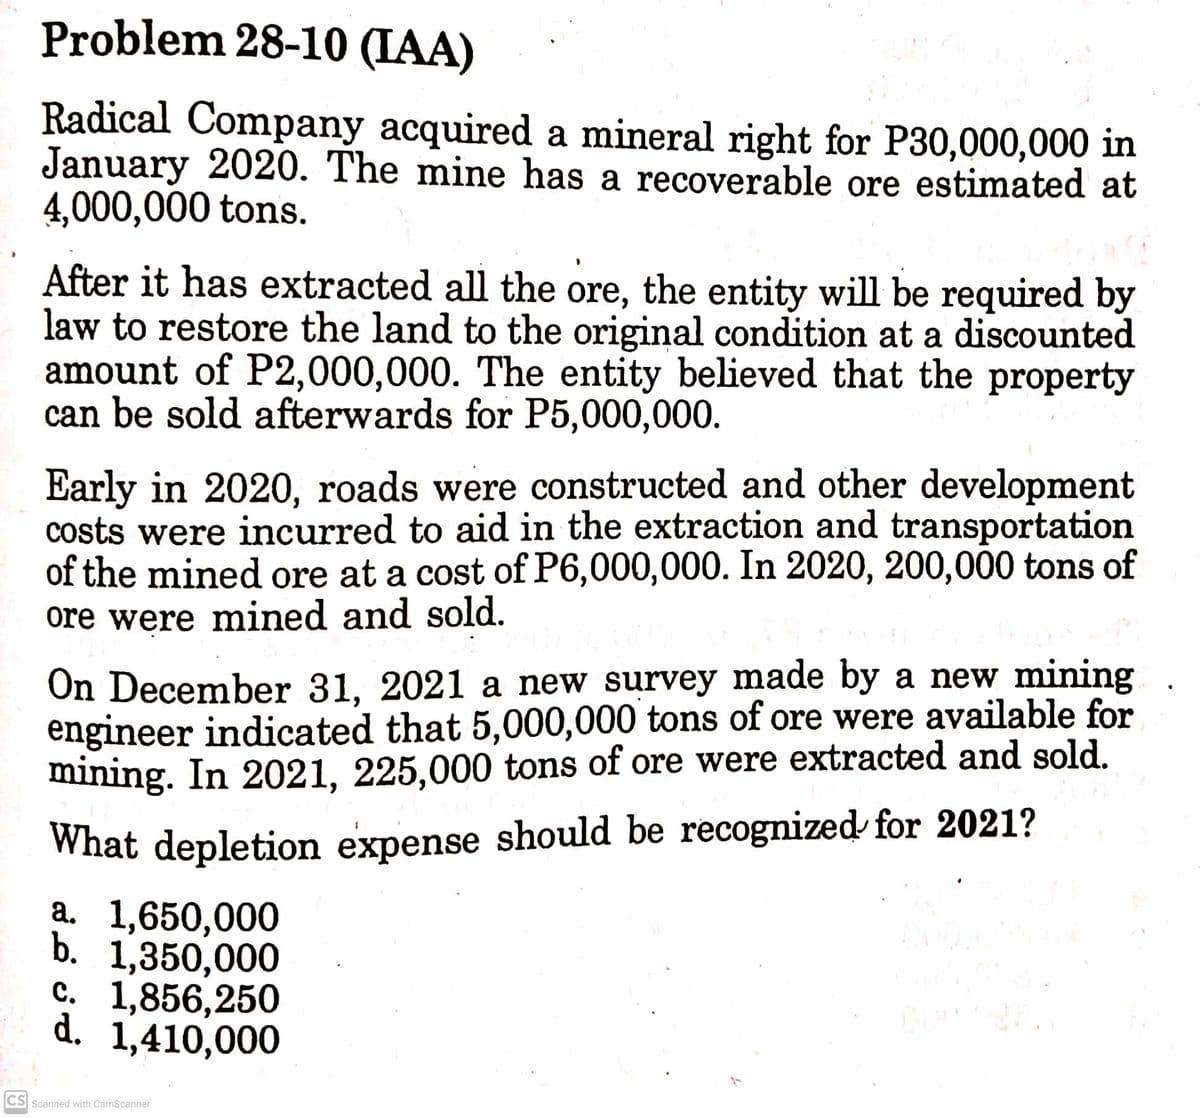 Problem 28-10 (IAA)
Radical Company acquired a mineral right for P30,000,000 in
January 2020. The mine has a recoverable ore estimated at
4,000,000 tons.
After it has extracted all the ore, the entity will be required by
law to restore the land to the original condition at a discounted
amount of P2,000,000. The entity believed that the property
can be sold afterwards for P5,000,000.
Early in 2020, roads were constructed and other development
costs were incurred to aid in the extraction and transportation
of the mined ore at a cost of P6,000,000. In 2020, 200,000 tons of
ore were mined and sold.
On December 31, 2021 a new survey made by a new mining
engineer indicated that 5,000,000 tons of ore were available for
mining. In 2021, 225,000 tons of ore were extracted and sold.
What depletion expense should be recognized for 2021?
a. 1,650,000
b. 1,350,000
с. 1,856,250
d. 1,410,000
CS Scanned with CamScanner
